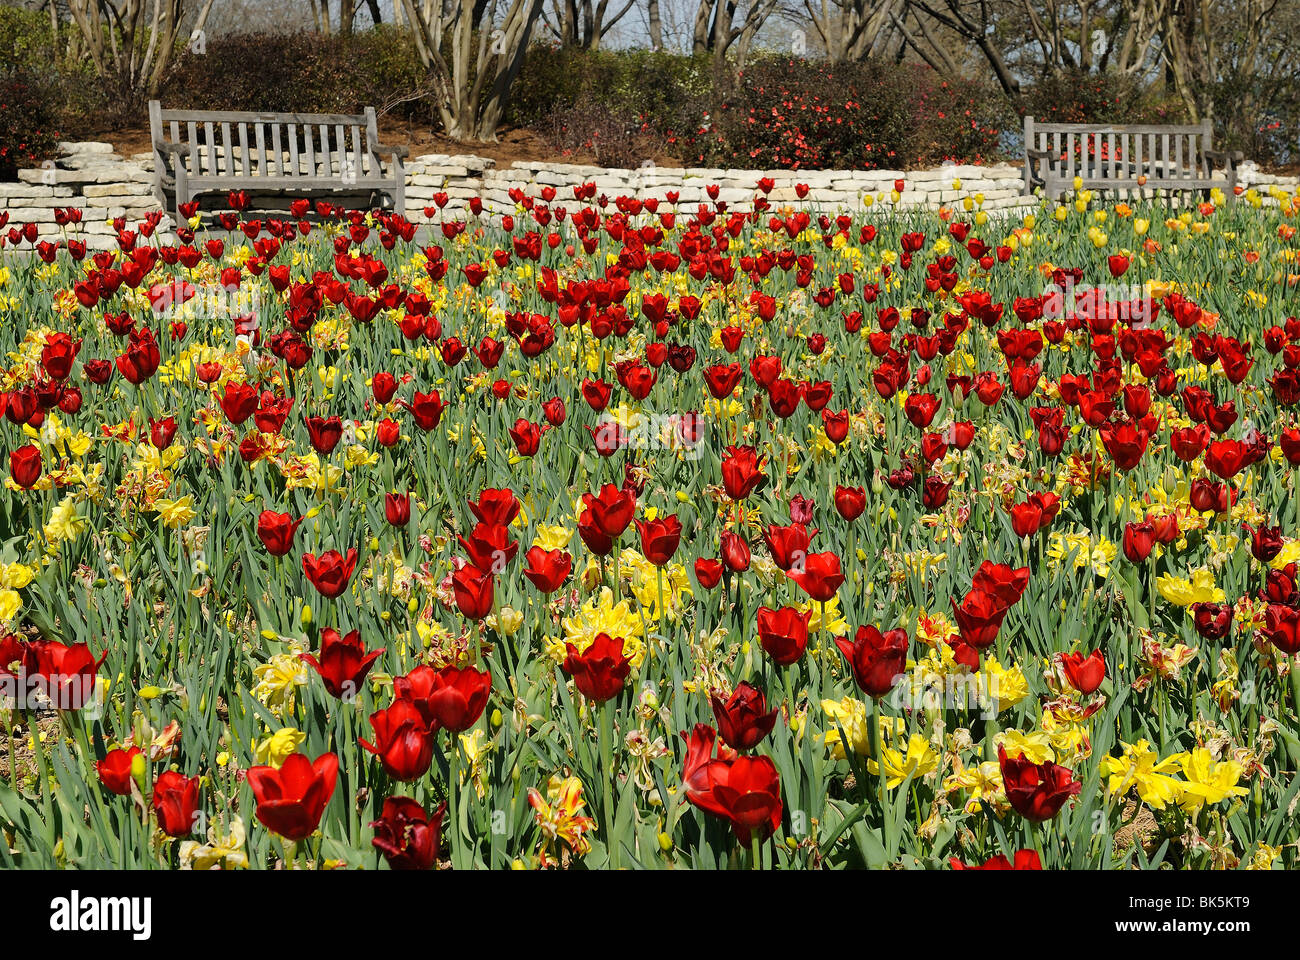 Flower beds blooming in the Dallas Arboretum Park, Texas Stock Photo